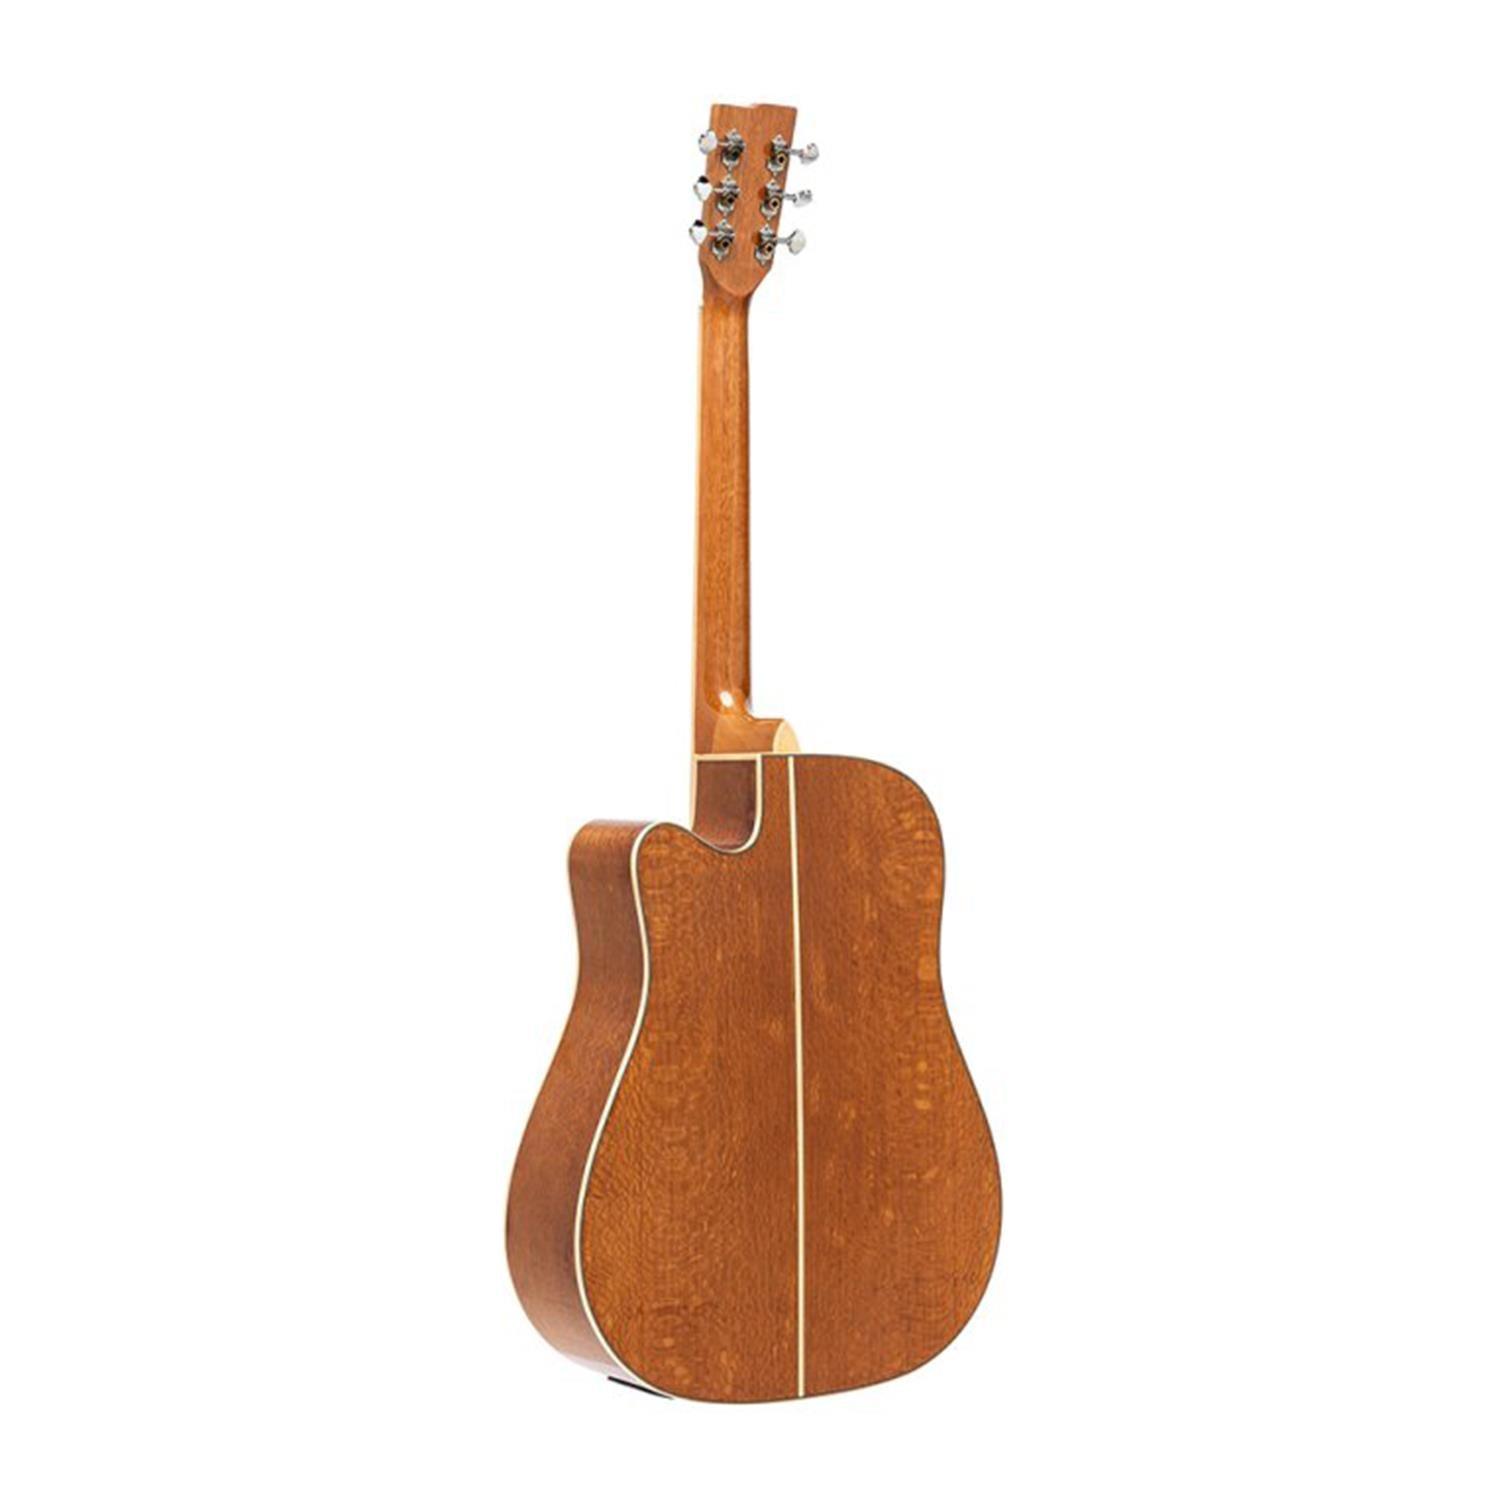 Stagg SA45 DCE-LW Series 45 Natural Dreadnought Cutaway Acoustic Guitar with Spruce Top - DY Pro Audio